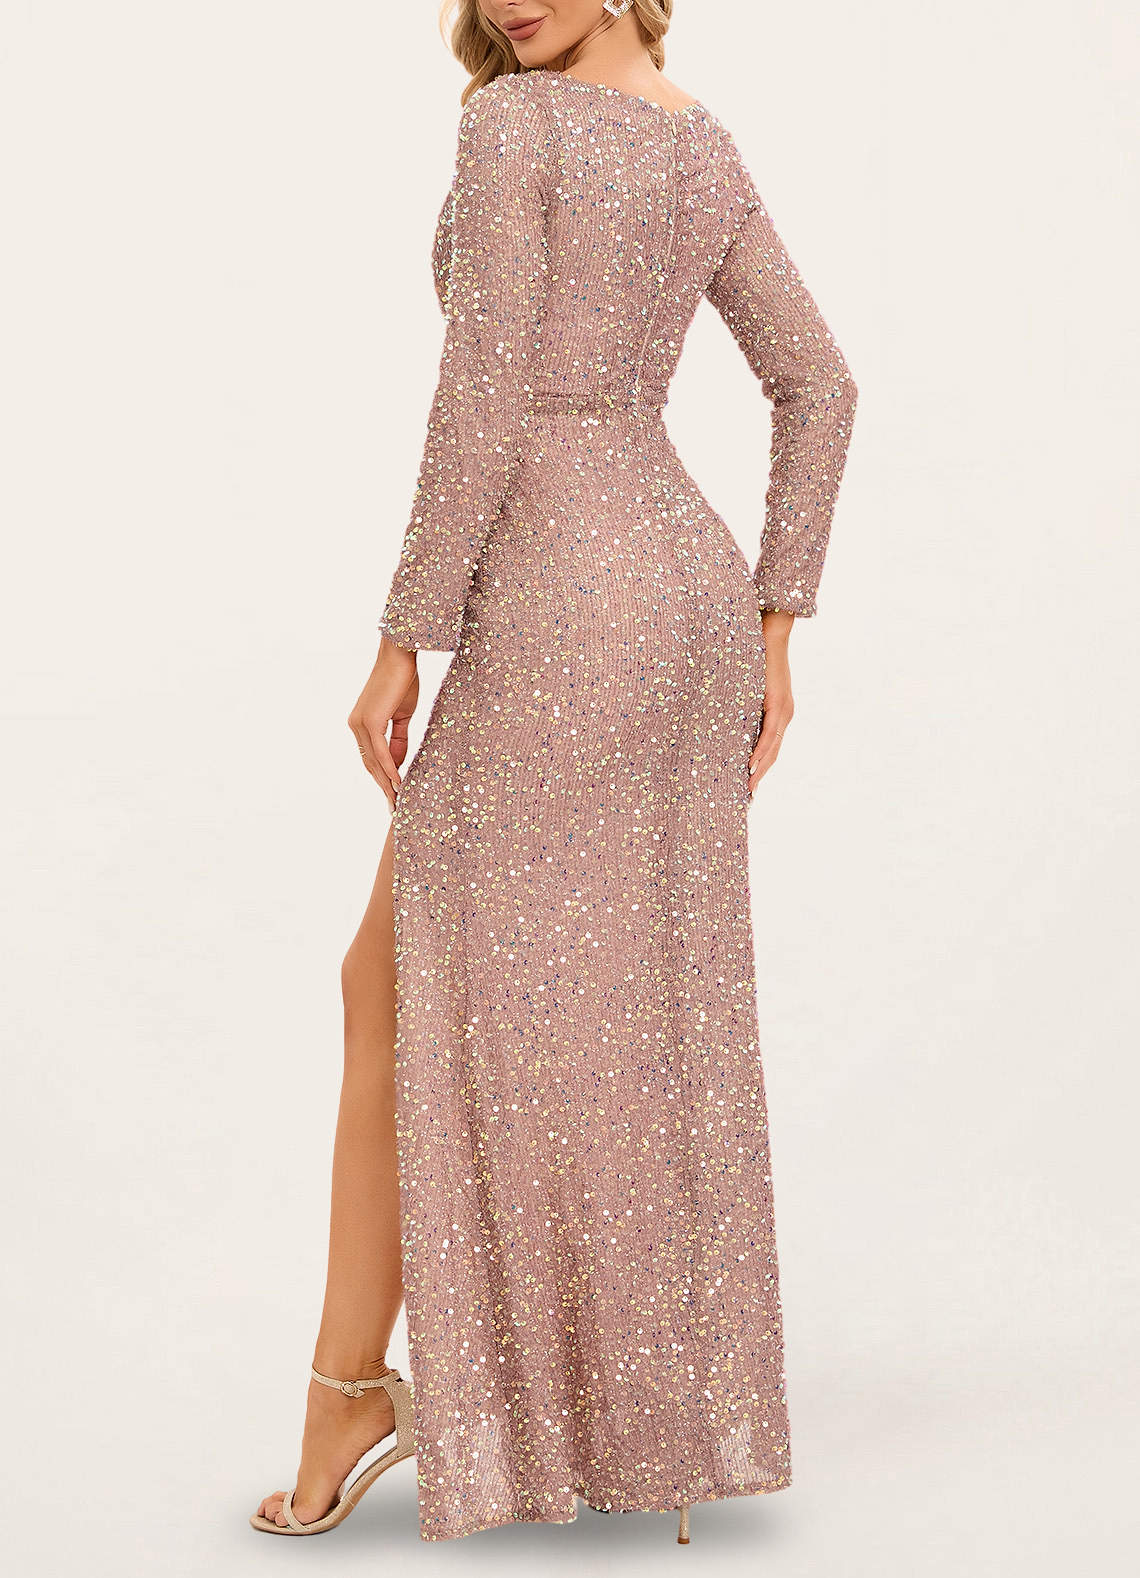 Love Lasts Forever Champagne Sequin Long Sleeve Maxi Dress image1